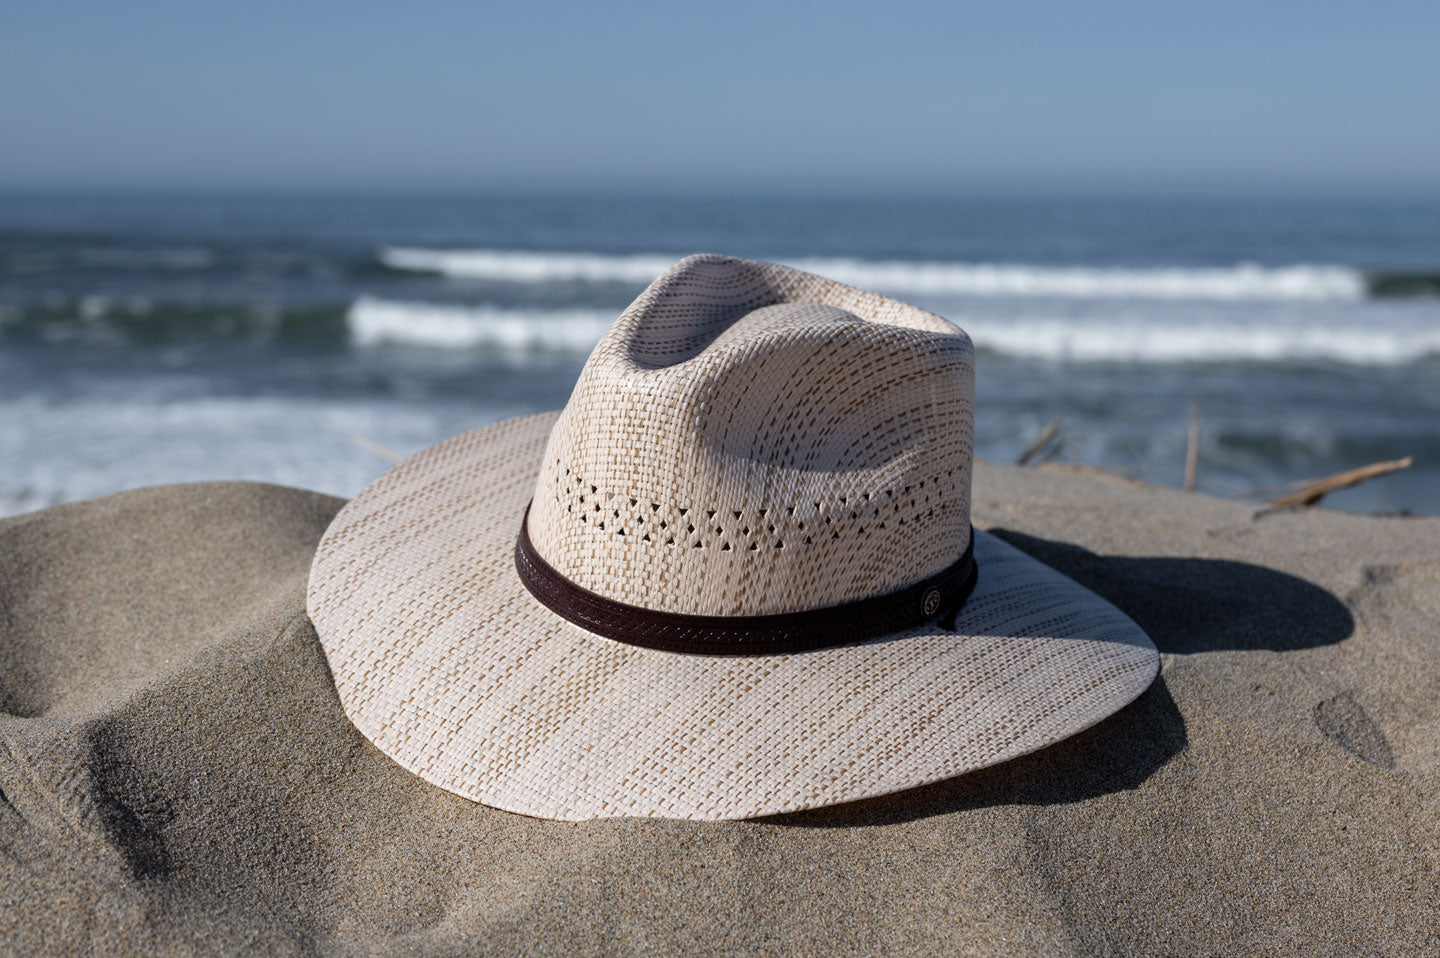 Barcelona sun hat by American hat Makers on beach